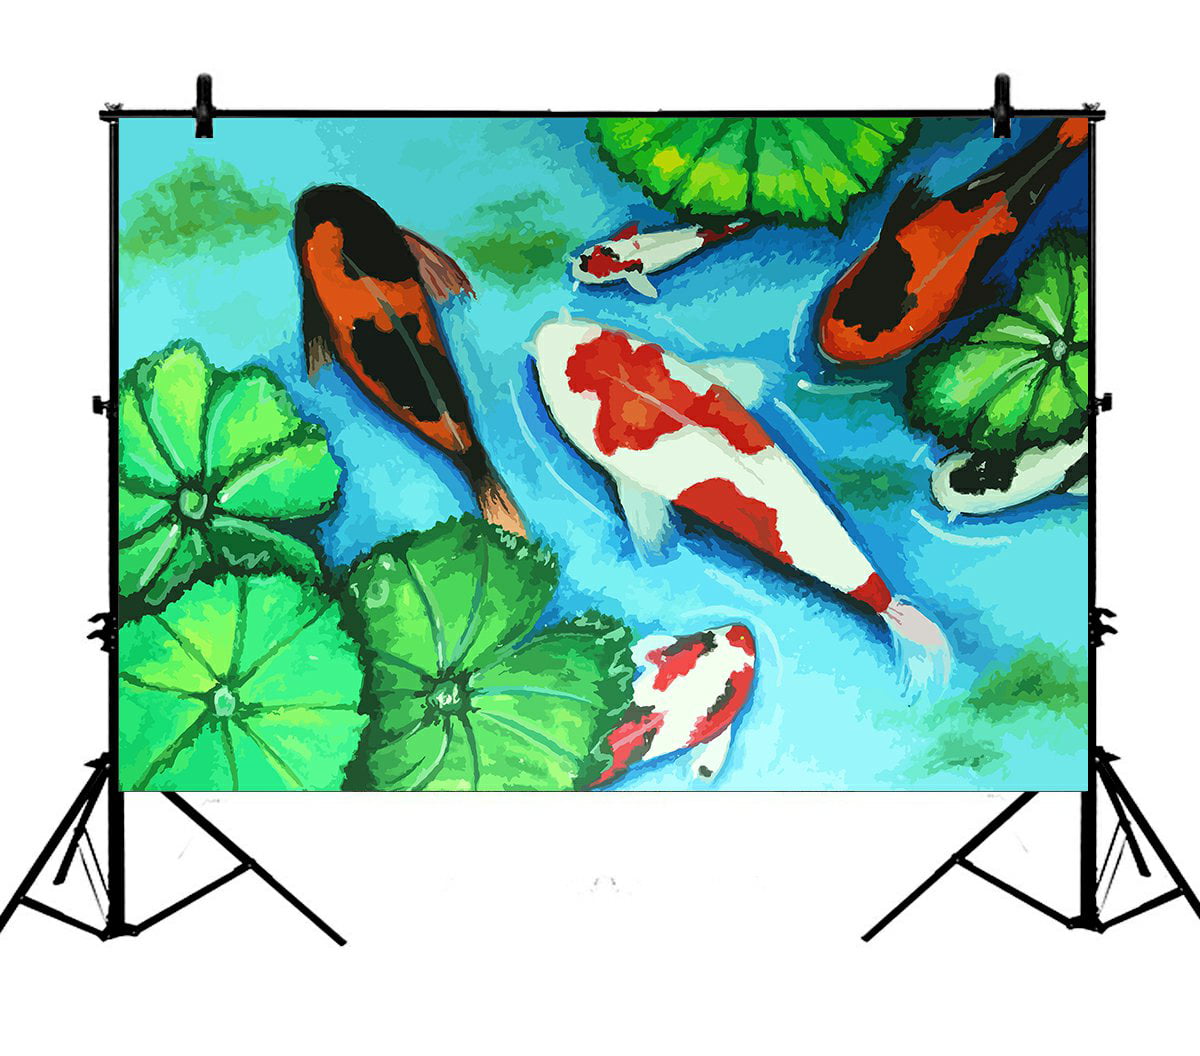 Cute Regular Different Sized Japanese Koi Fish Patterns Ocean Marine Underwater Theme Background for Baby Shower Bridal Wedding Studio Photography Pictures Teal Koi Fish 6x8 FT Photography Backdrop